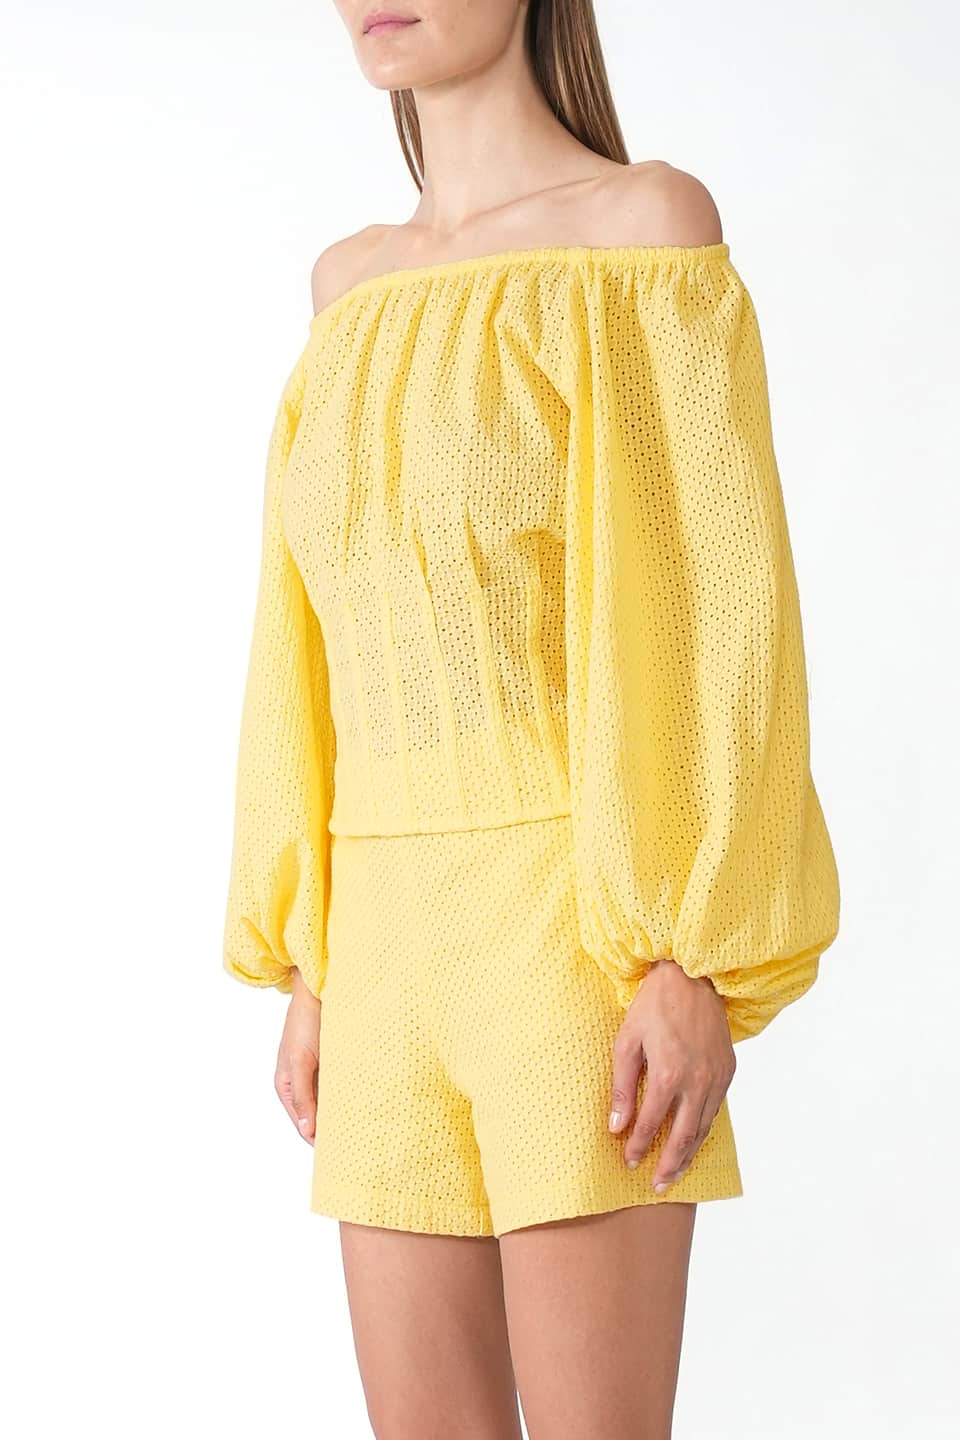 Designer Yellow Women blouses, shop online with free delivery in UAE. Product gallery 2